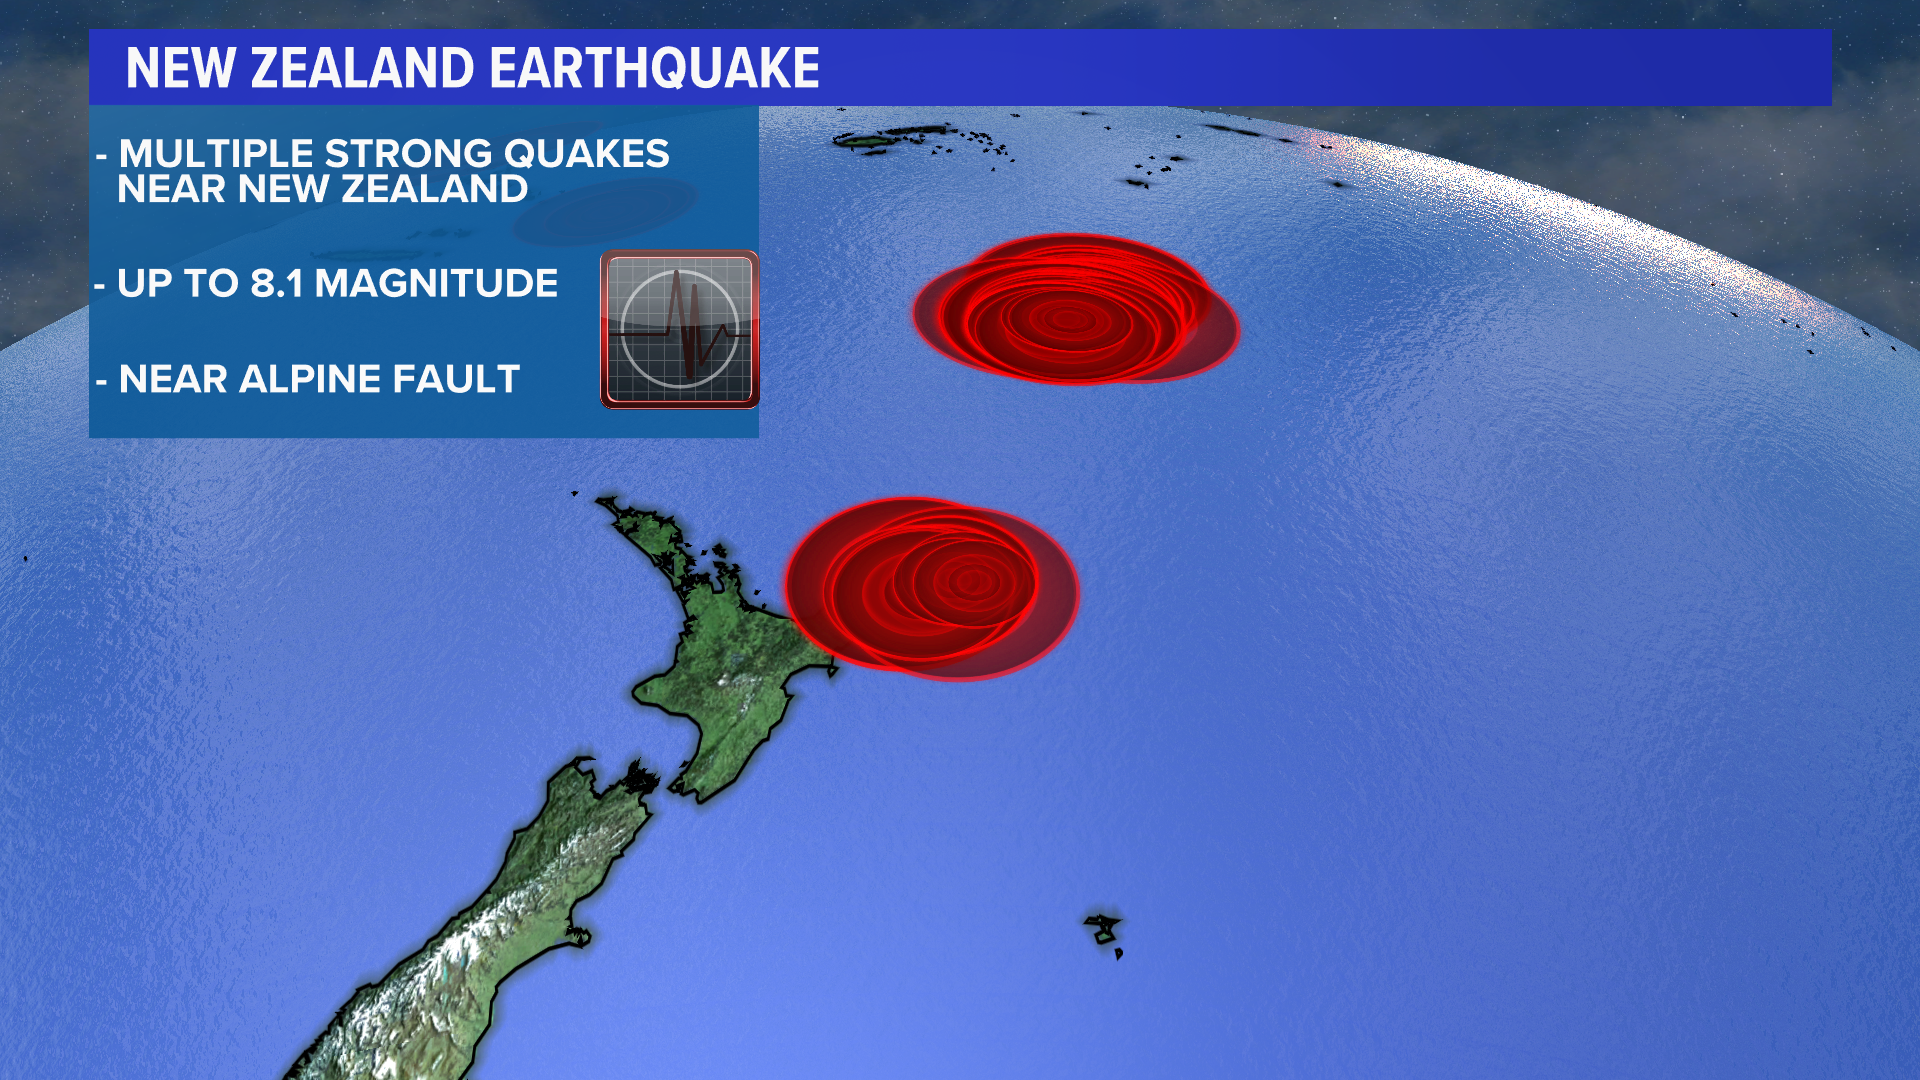 The strong quake near New Zealand on Thursday was picked up by the seismometers over 9,000 miles away in Maine and New England.